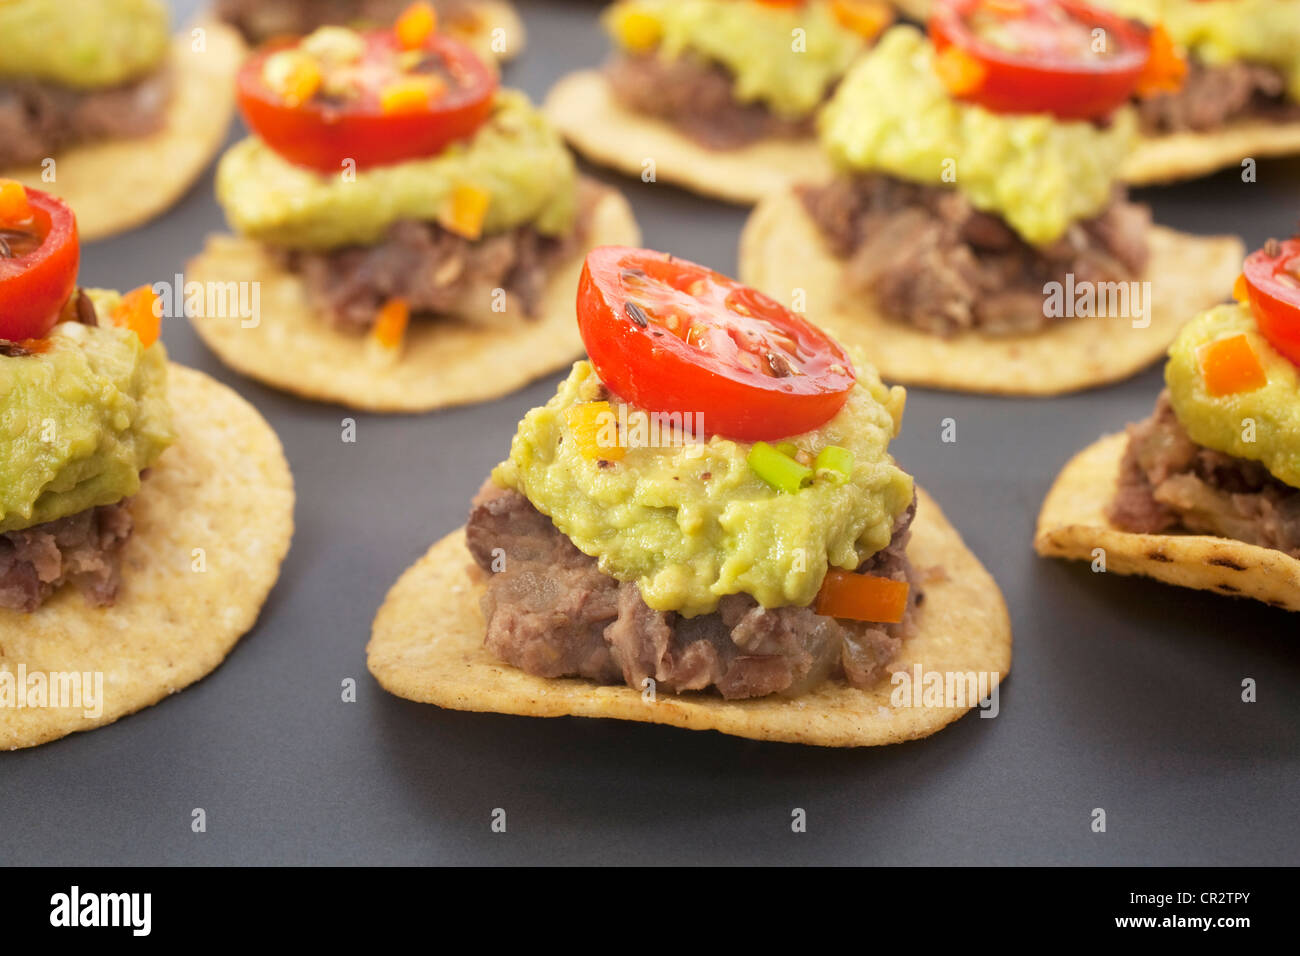 Spicy Mexican party food, corn chips topped with refried beans, avocado and tomato salsa. Stock Photo